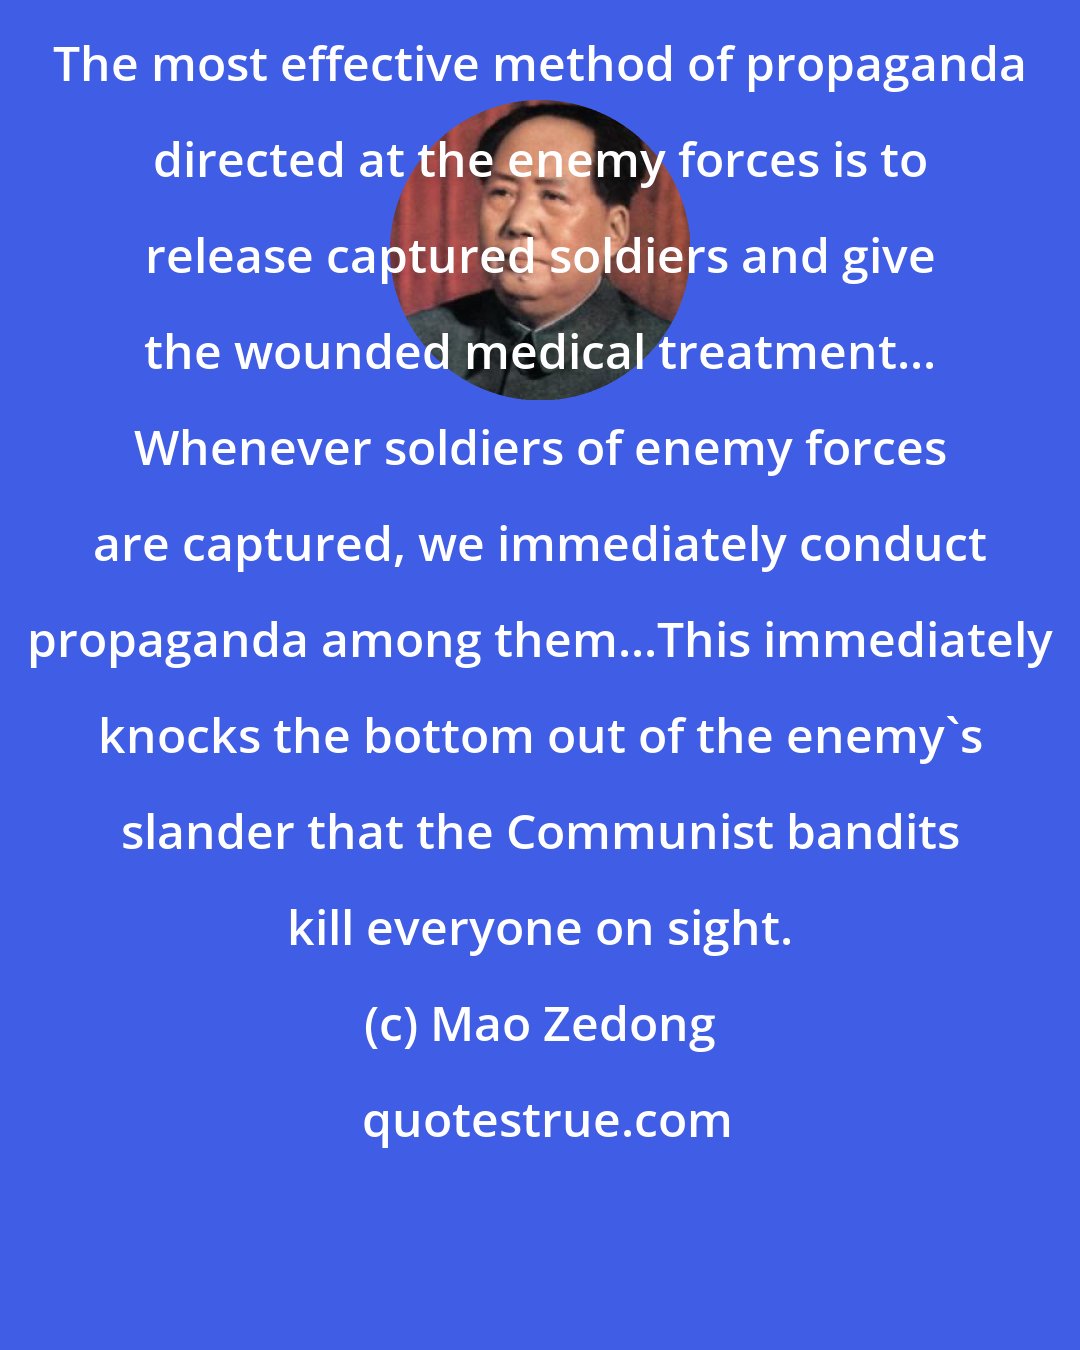 Mao Zedong: The most effective method of propaganda directed at the enemy forces is to release captured soldiers and give the wounded medical treatment... Whenever soldiers of enemy forces are captured, we immediately conduct propaganda among them...This immediately knocks the bottom out of the enemy's slander that the Communist bandits kill everyone on sight.